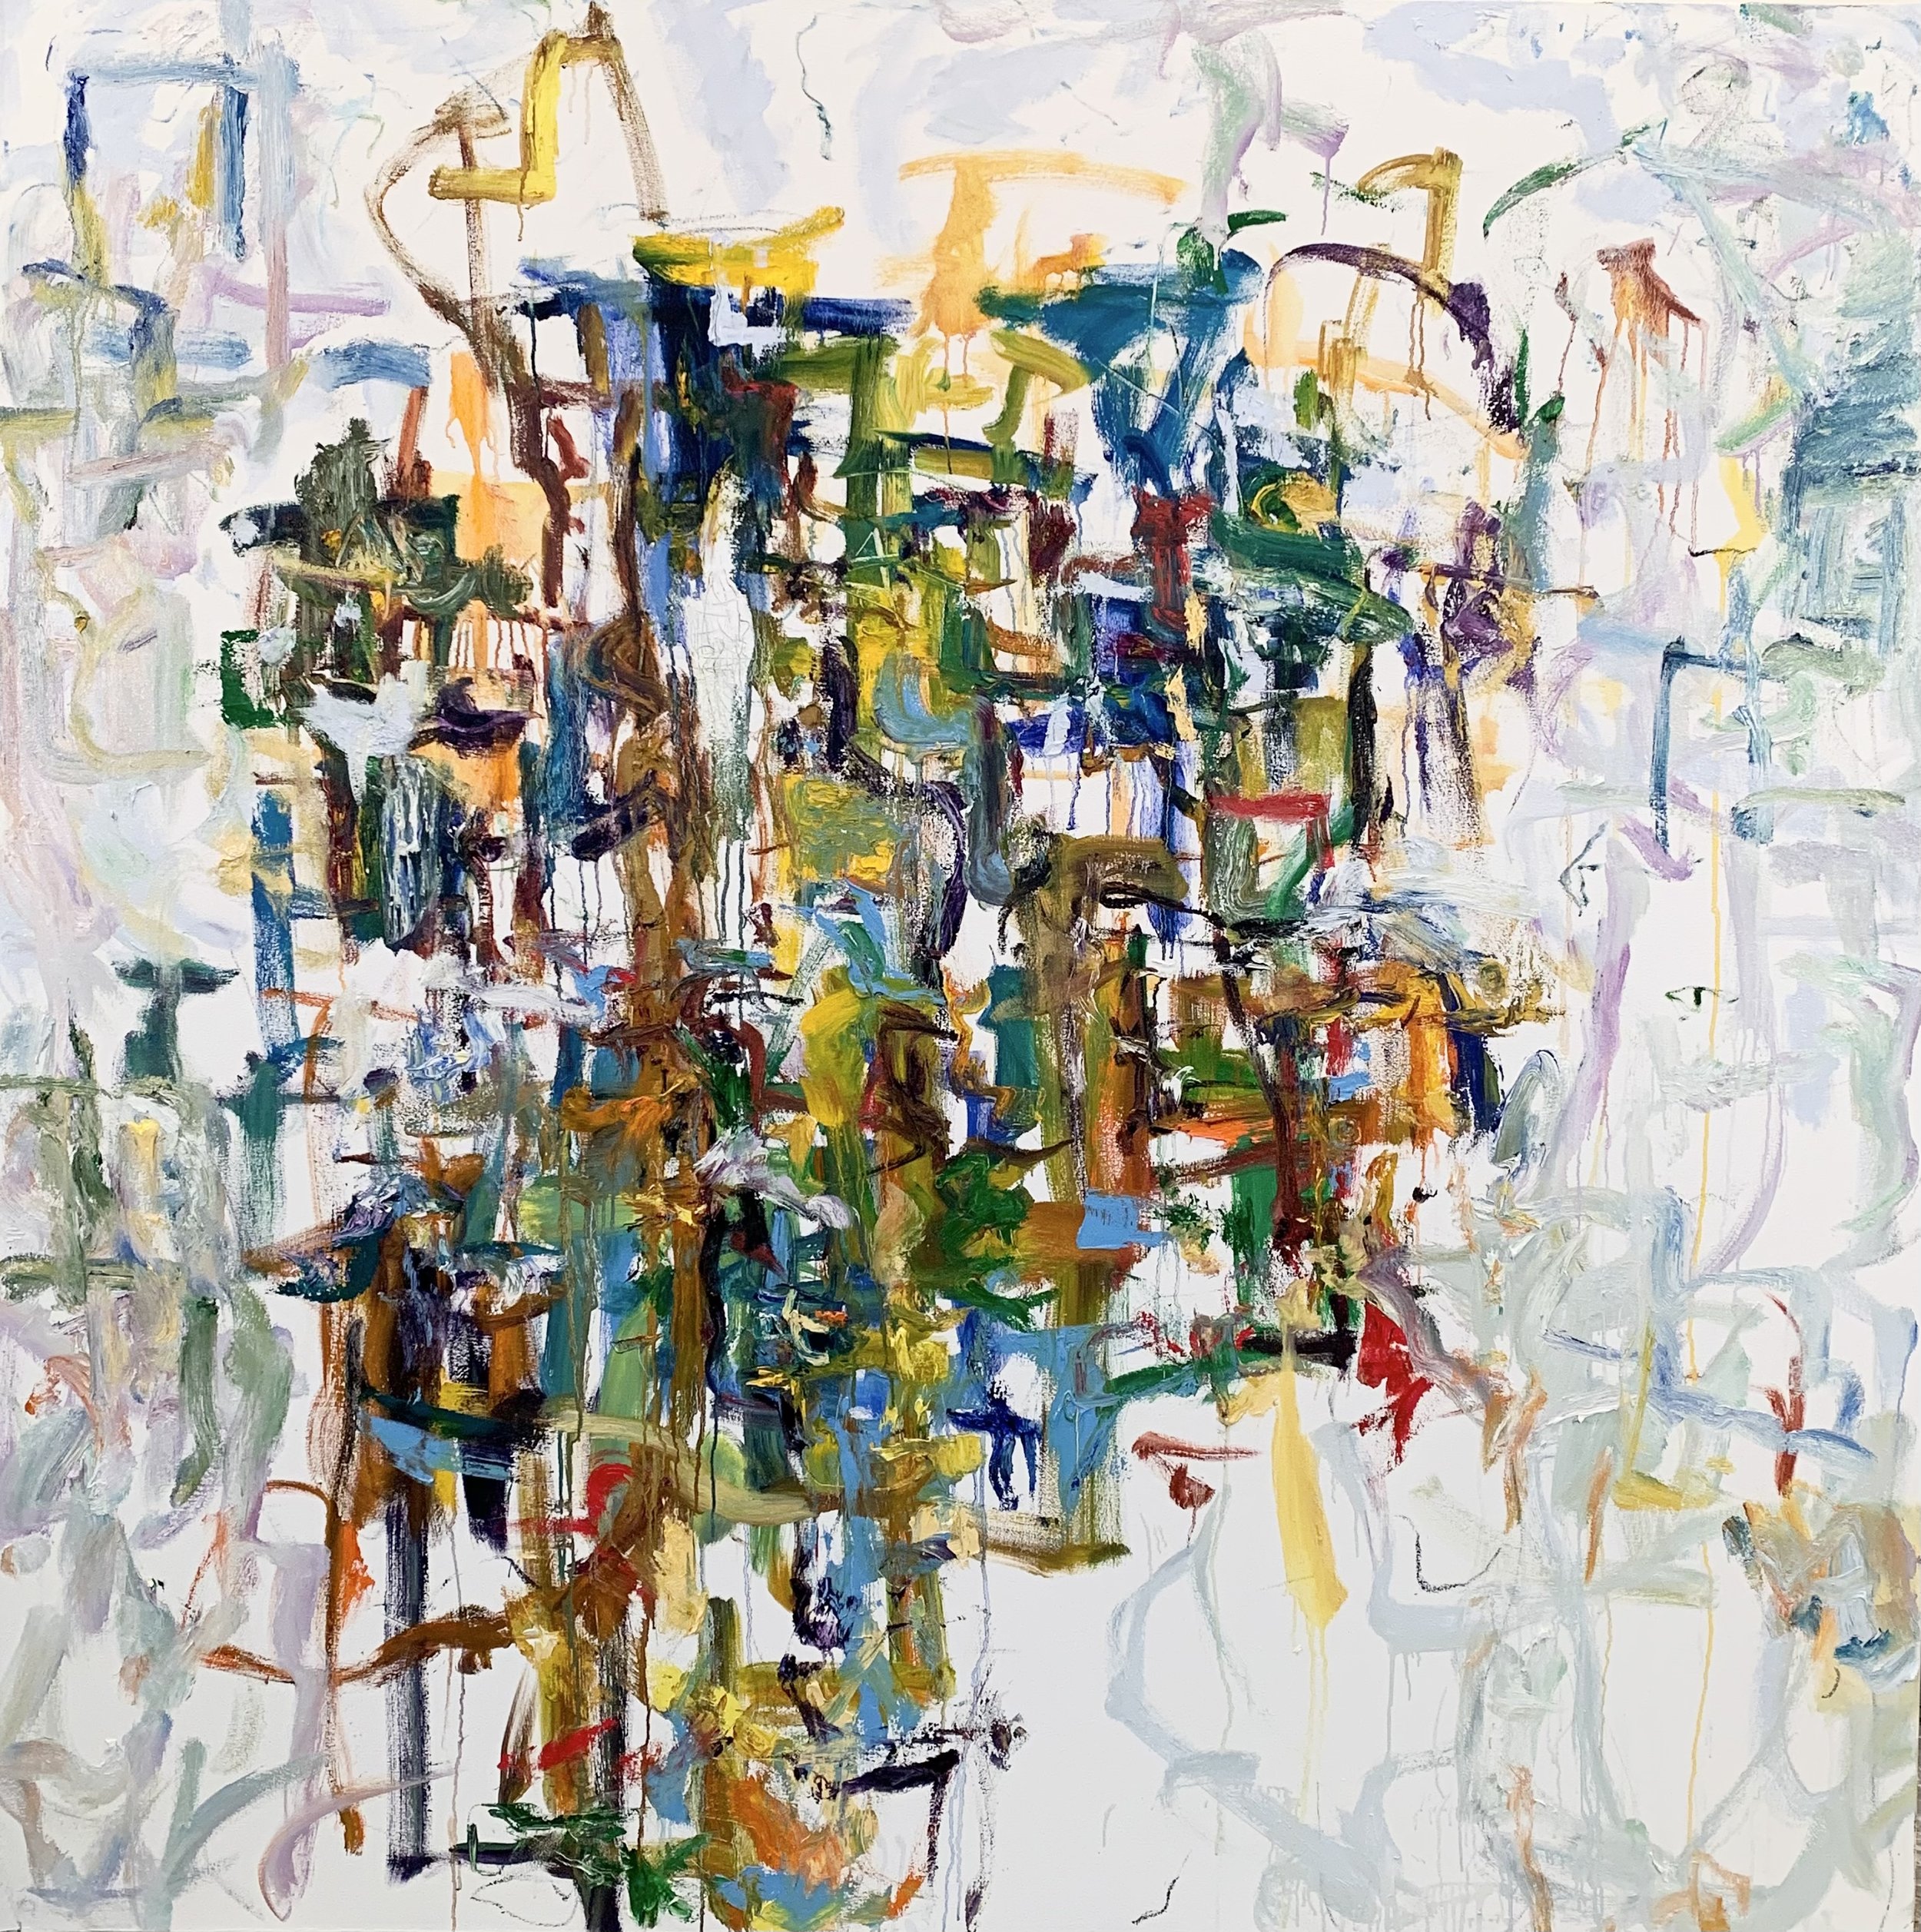 Untitled, 5-12-‘23, oil on canvas, 72”x72”